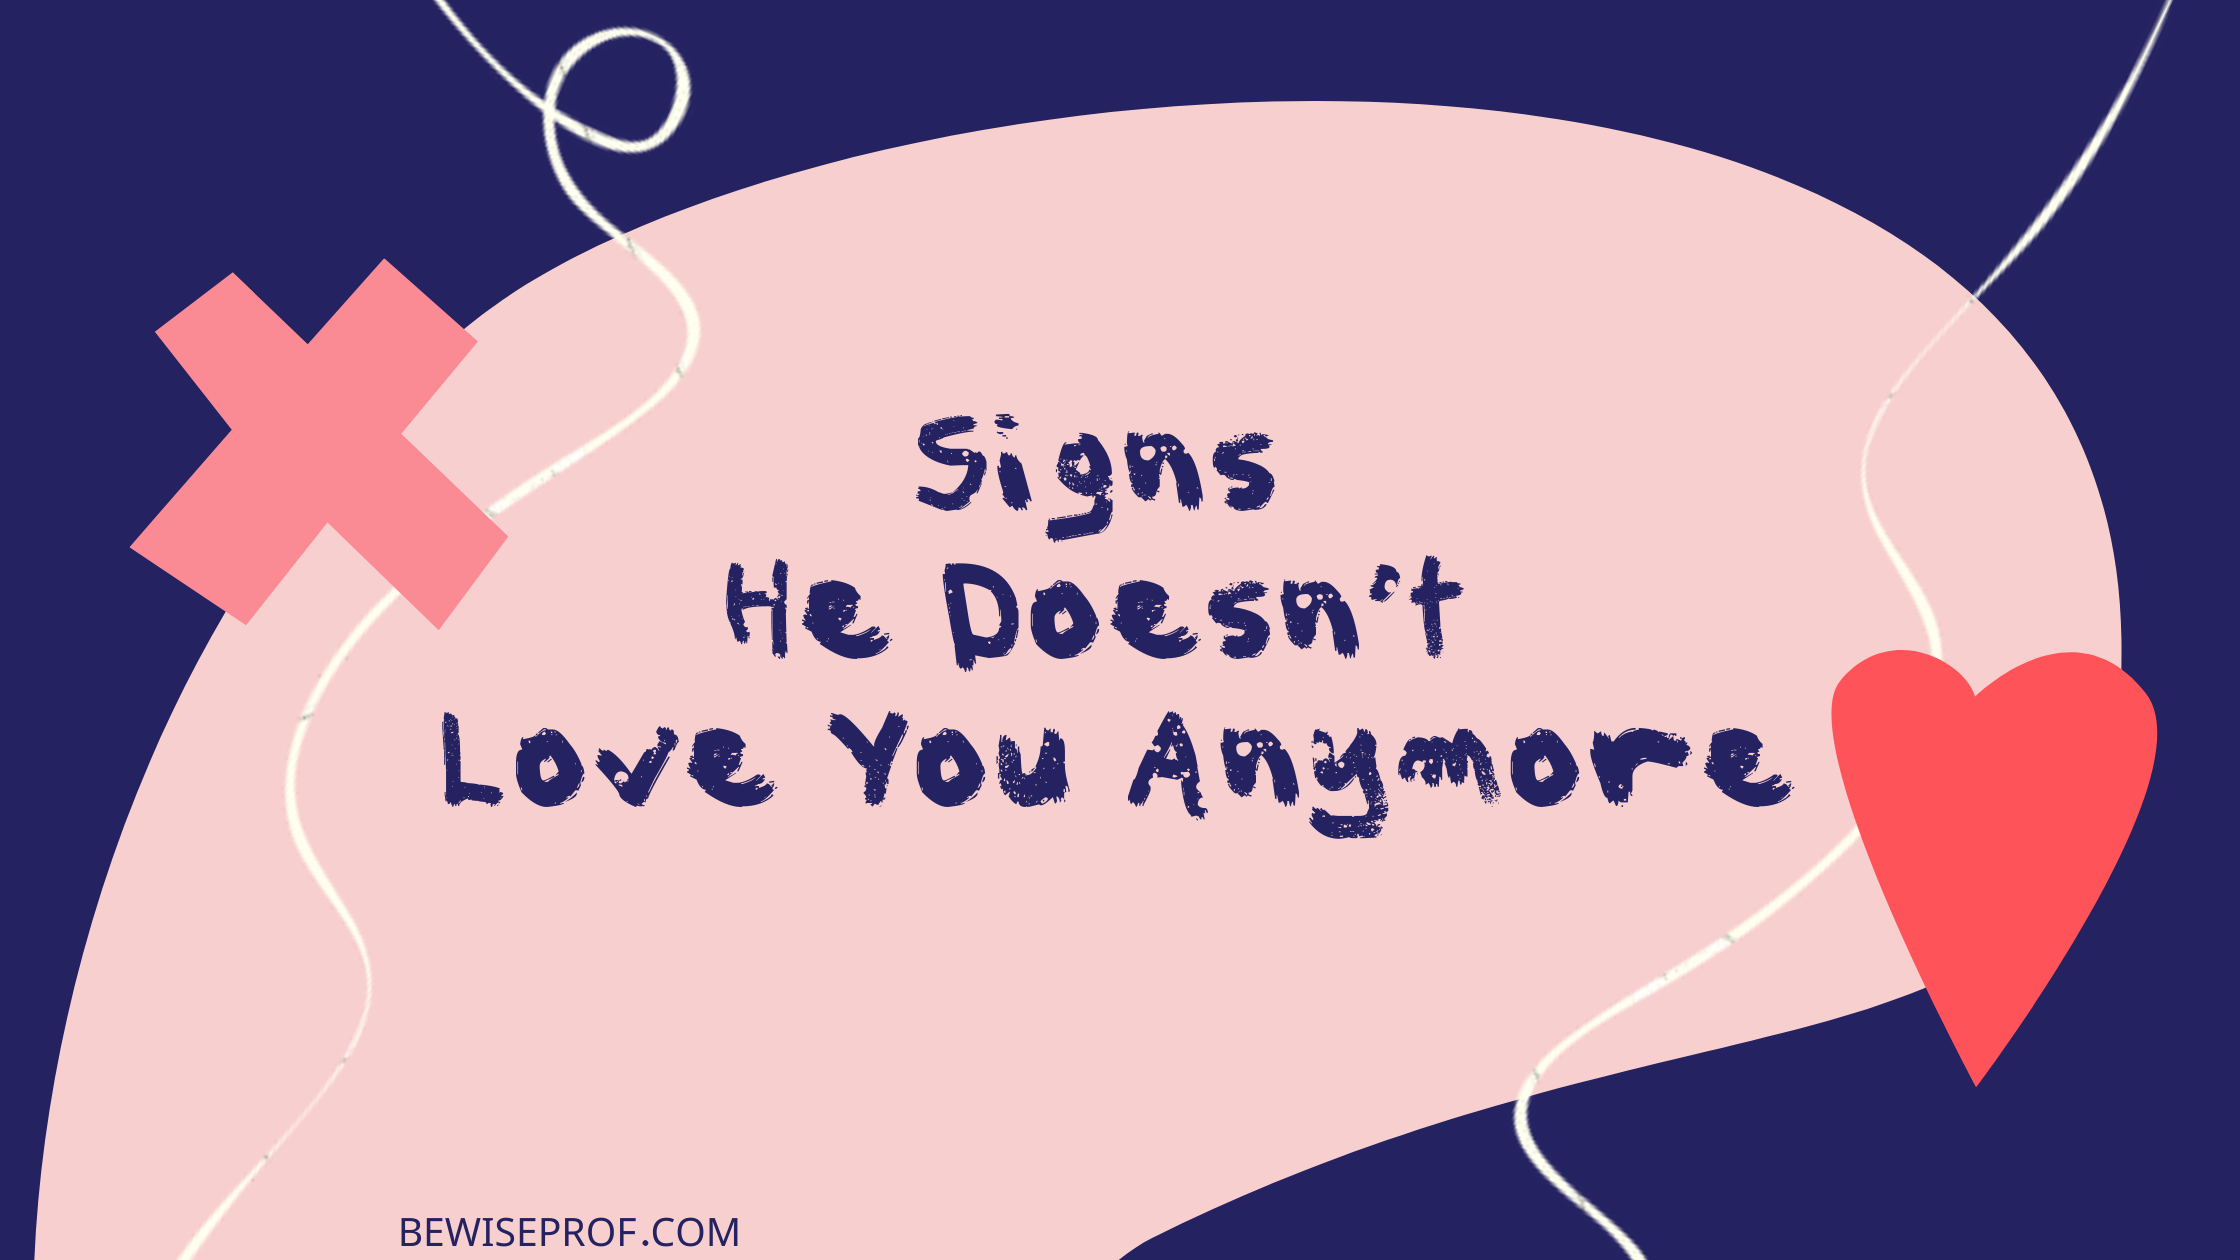 Signs He Doesn't Love You Anymore